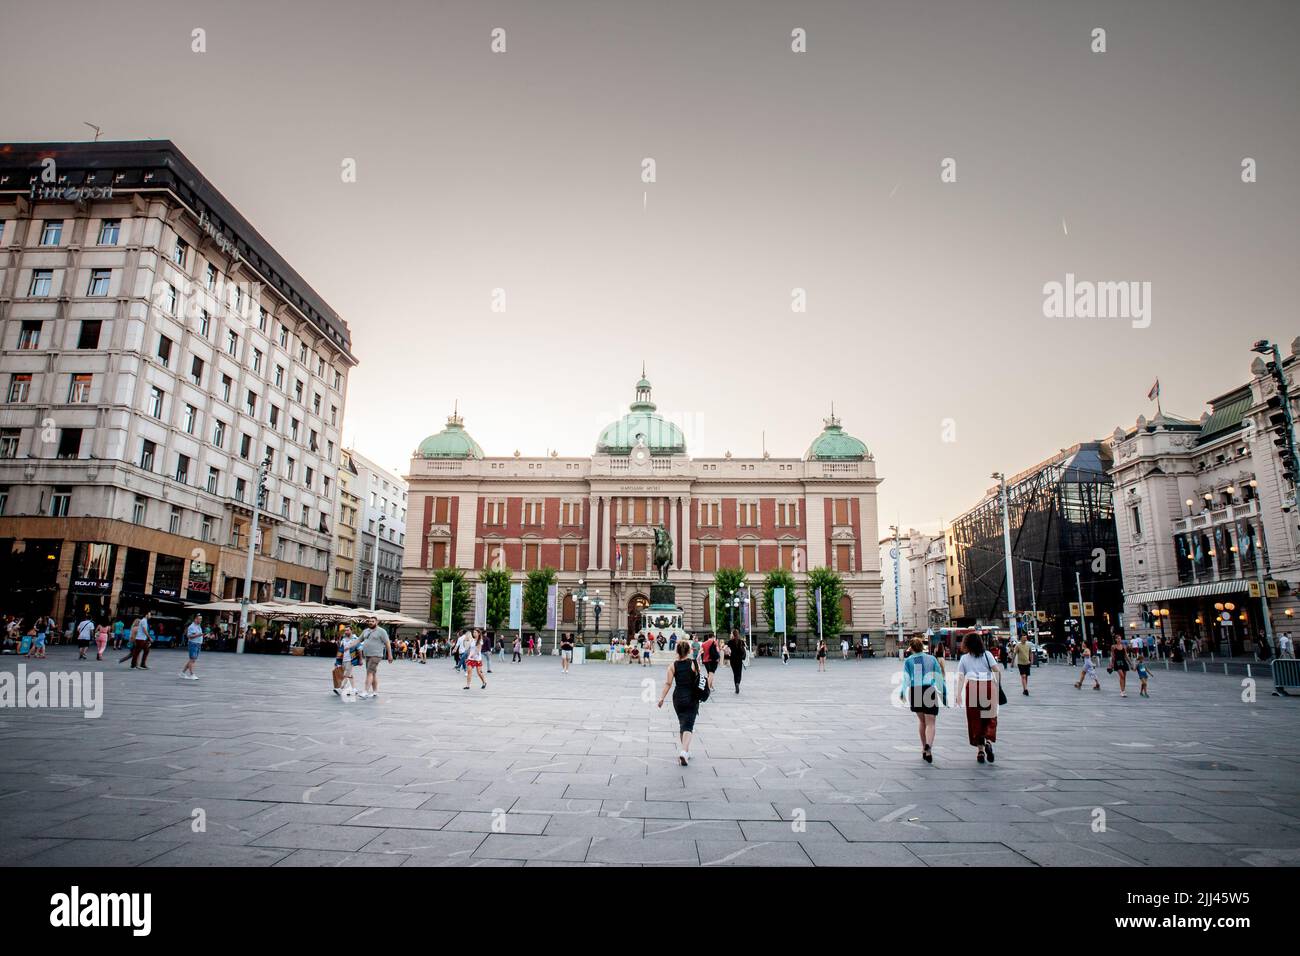 Picture of the national museum of Serbia in belgrade with the statue of Prince Mihailo in front, on Trg Republike, also called republic square at dusk Stock Photo